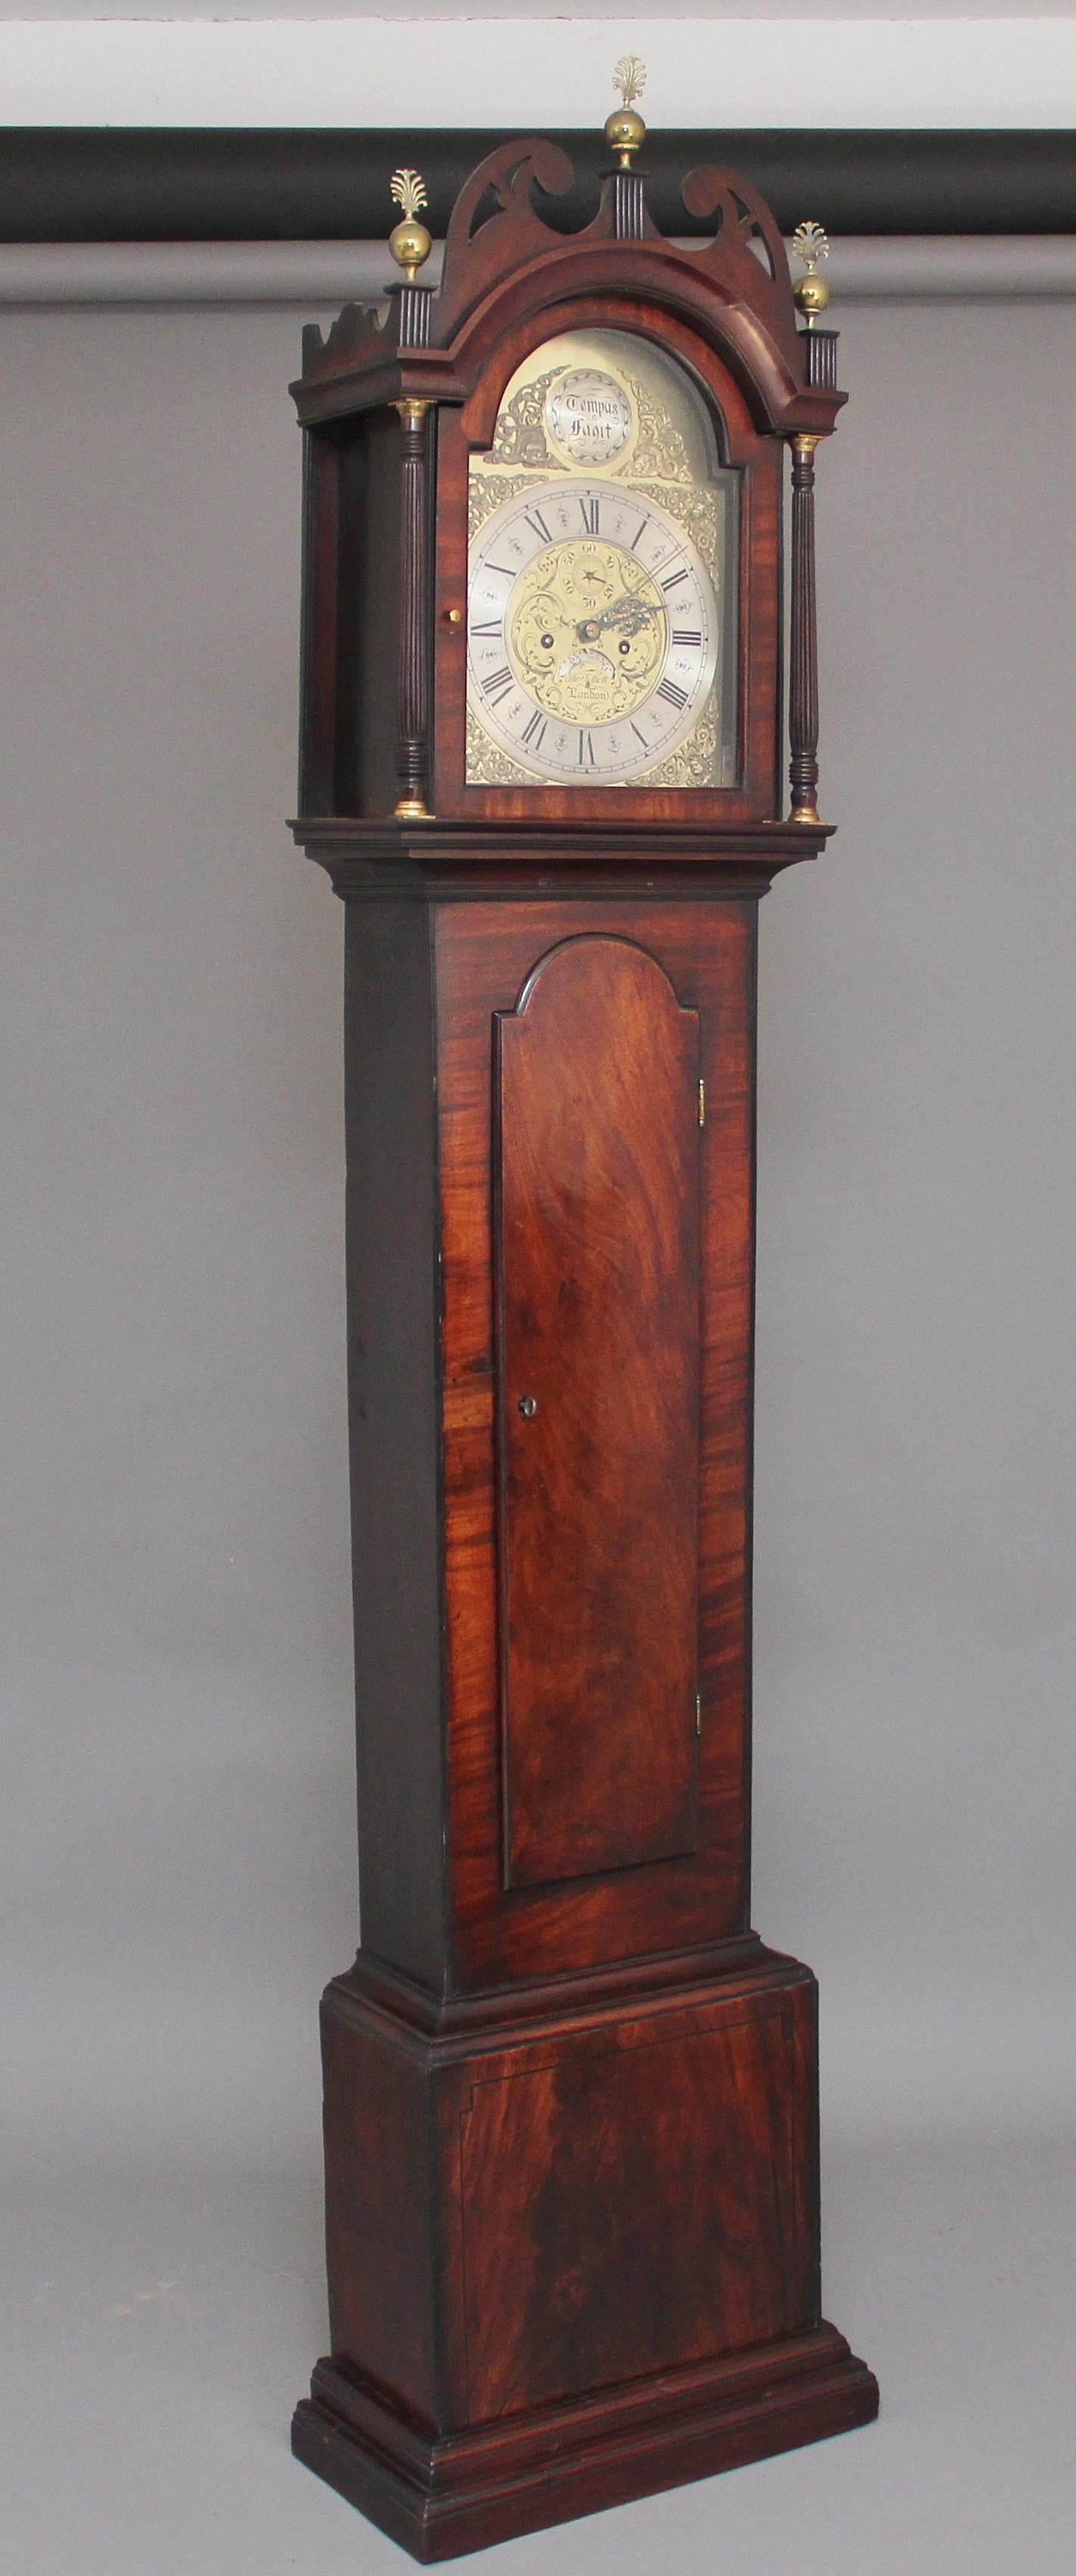 18th century mahogany long case clock by Thomas Elliott of London, it has an arch dial with a brass face and silvered chapter ring, the hood has turned and fluted columns either side of the door with brass capitals, the hood also has a lovely shaped